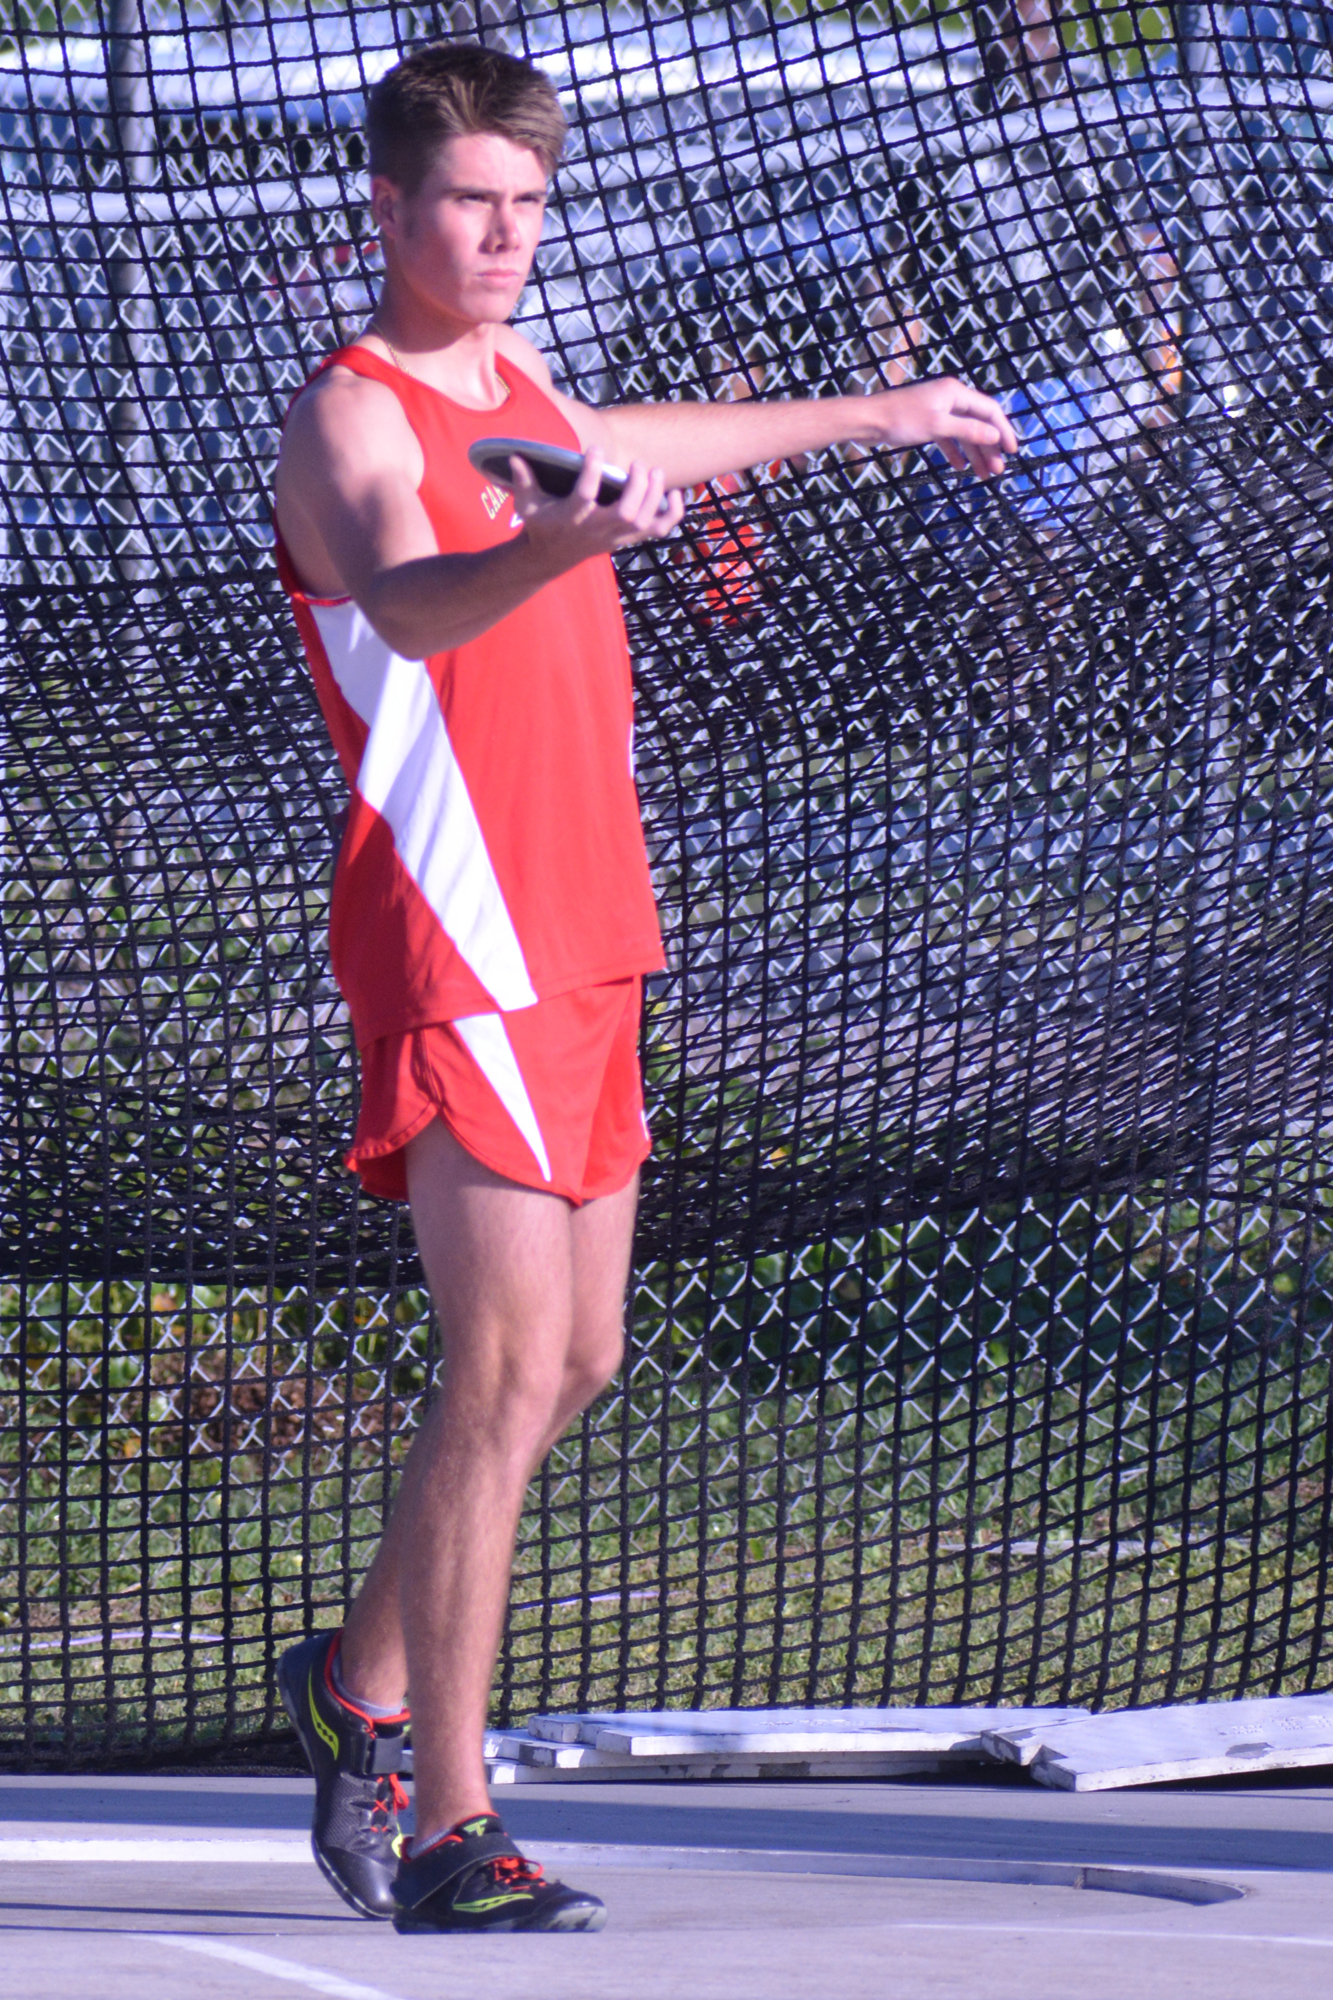 8. Mooney senior Max Middleton threw a discus 45.95 meters, or approximately 150 feet, 9 inches, to earn a silver medal at the Class 2A state championships.